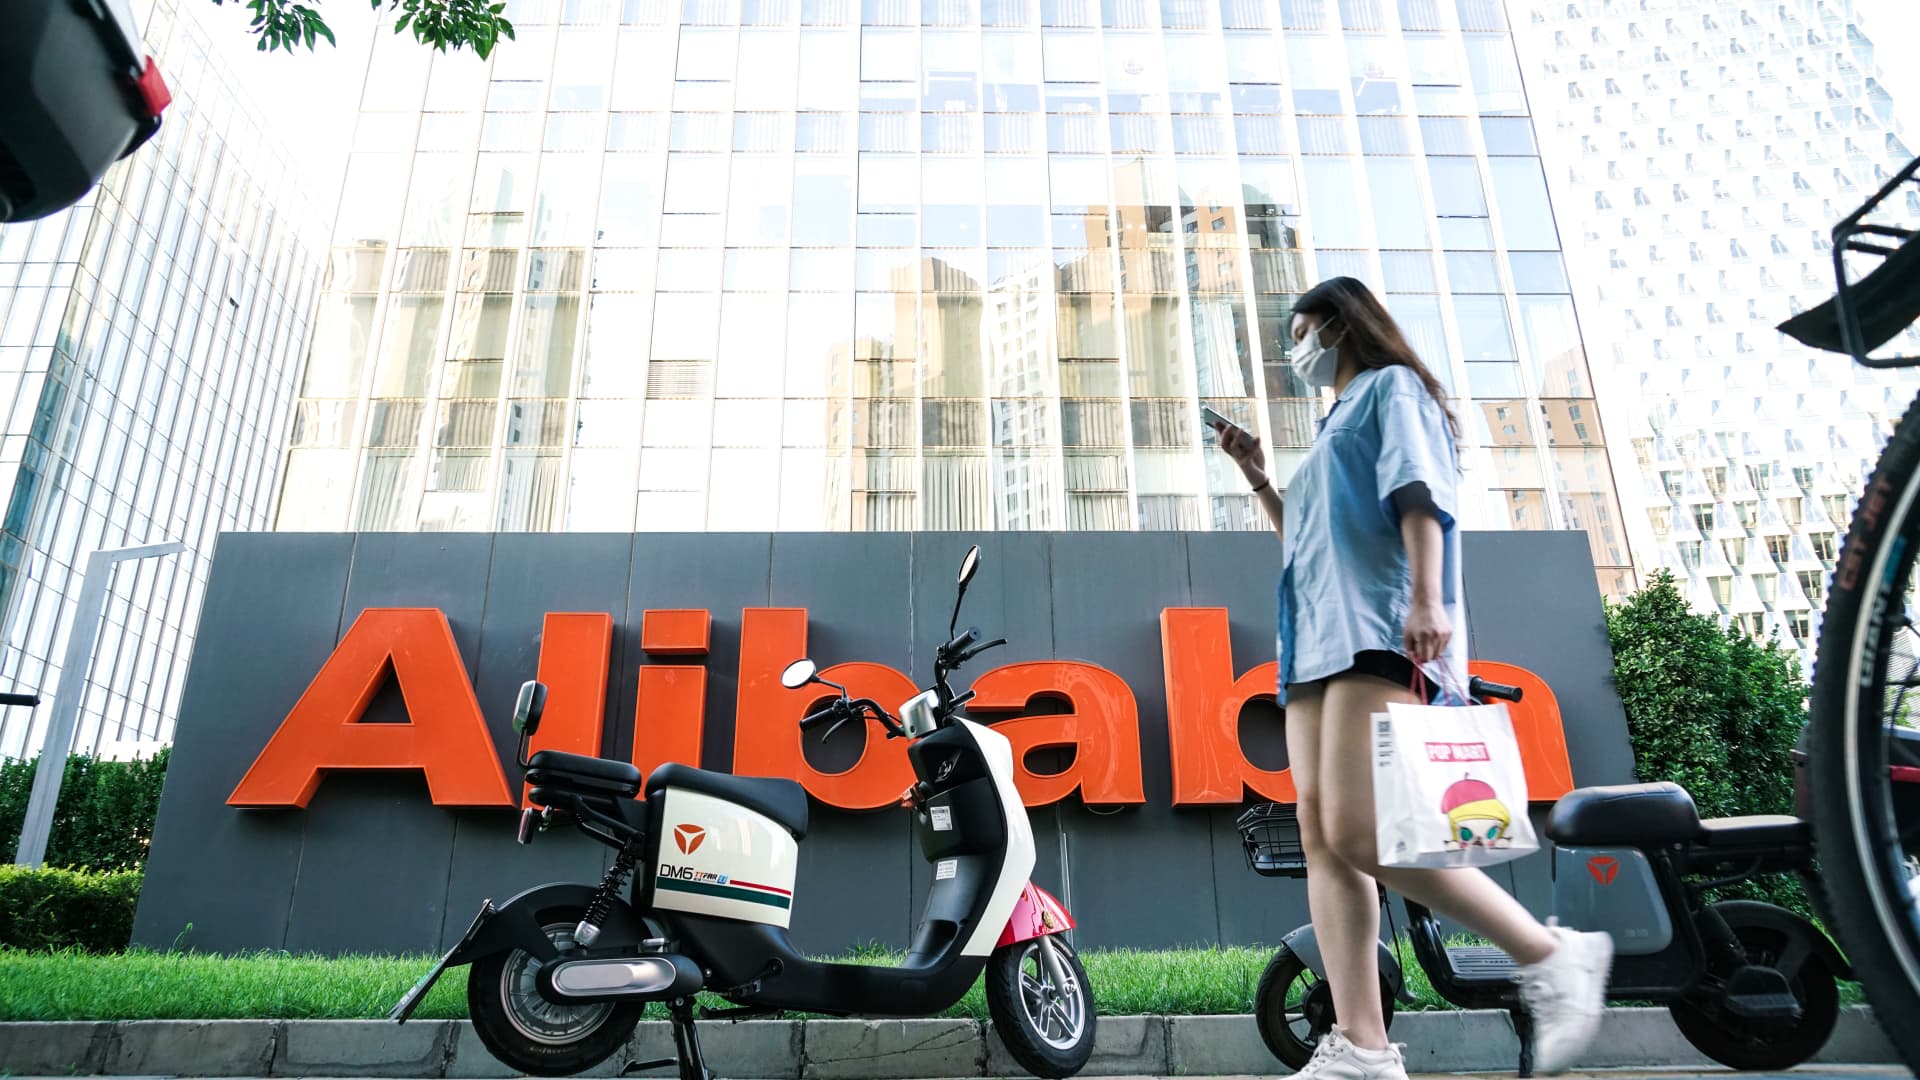 Alibaba to split into 6 units and explore IPOs; shares pop 6%